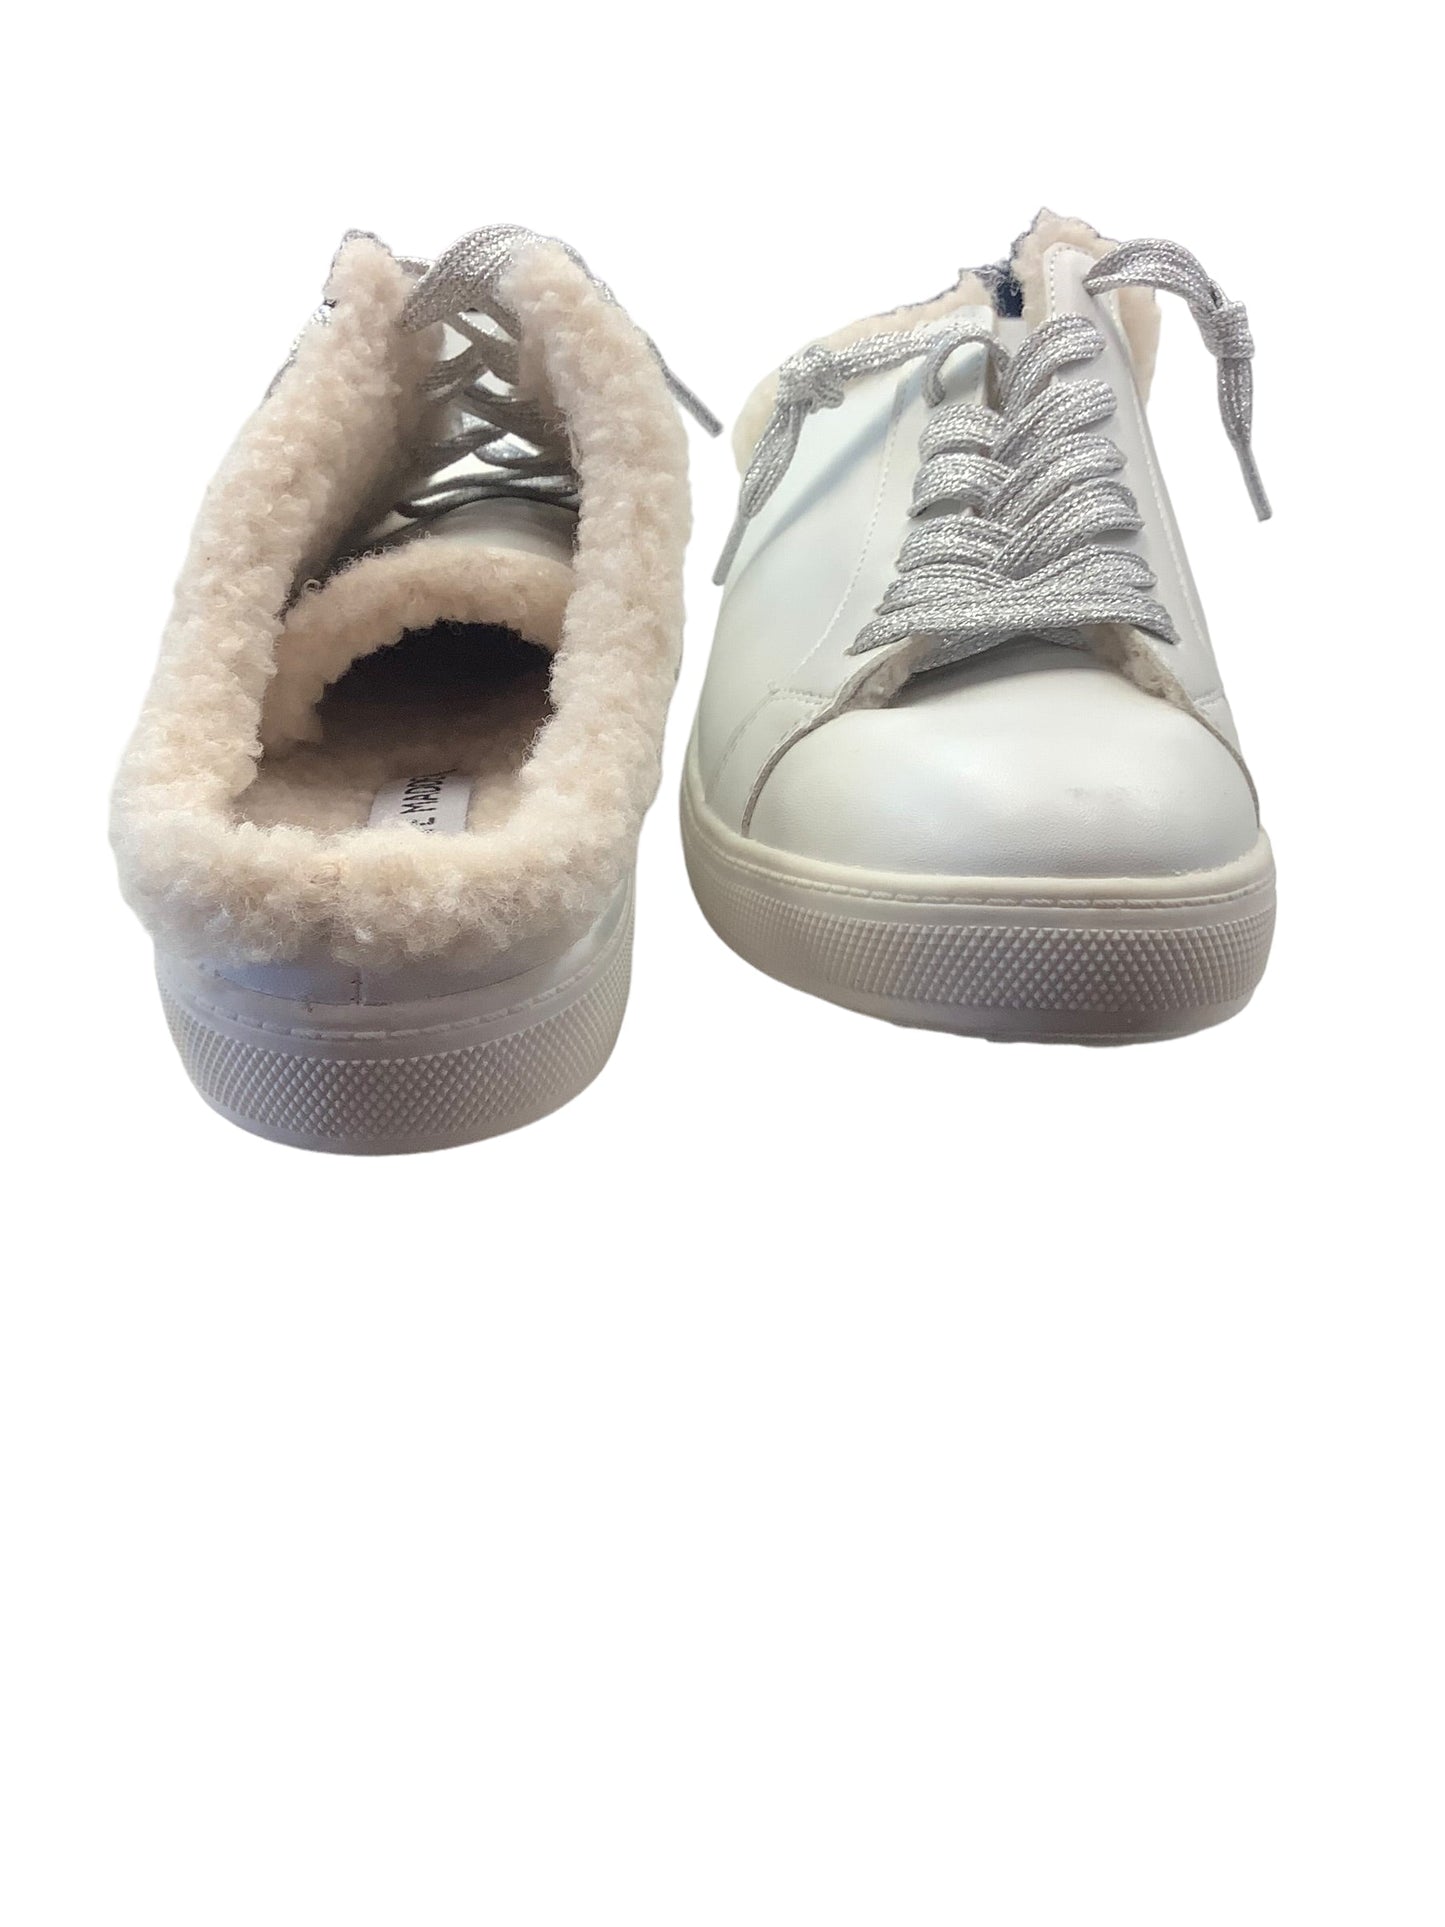 Shoes Sneakers By Steve Madden  Size: 9